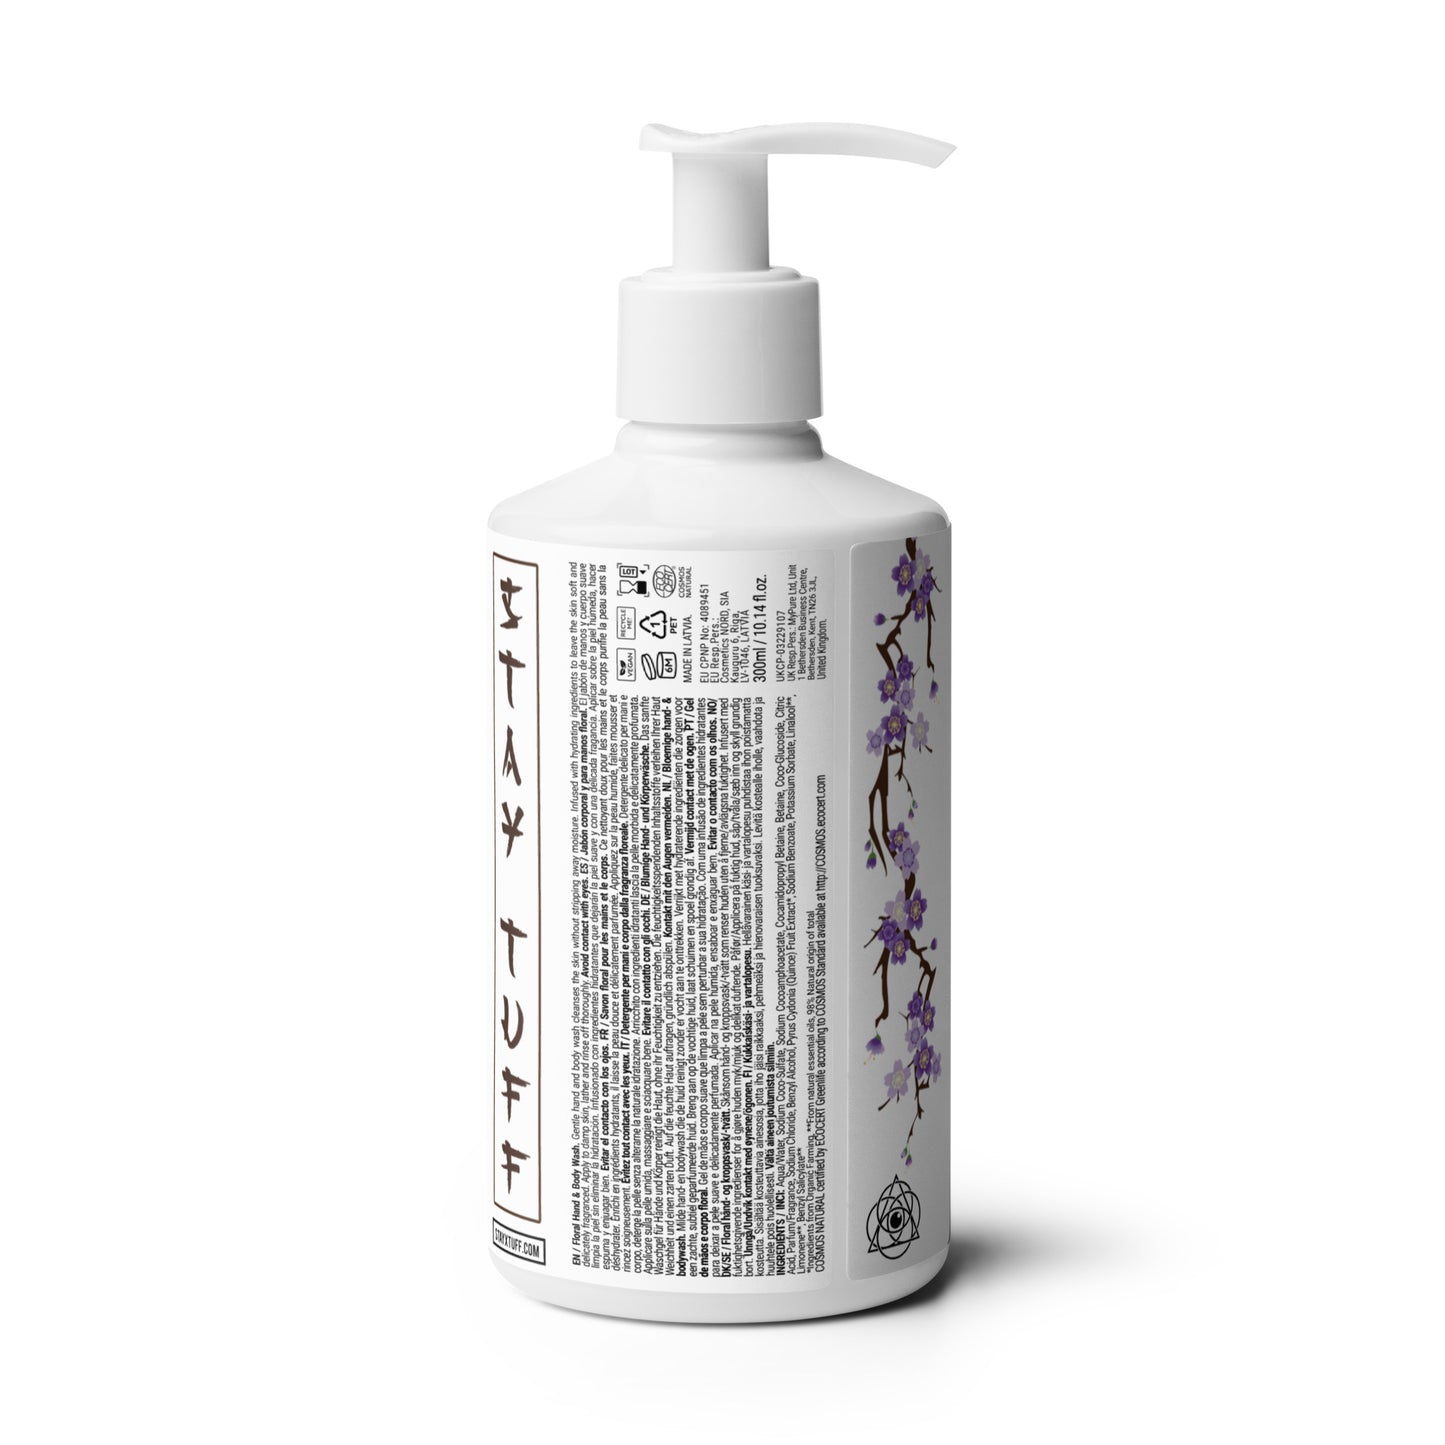 THE RISING SUN (Floral Hand & Body Wash)